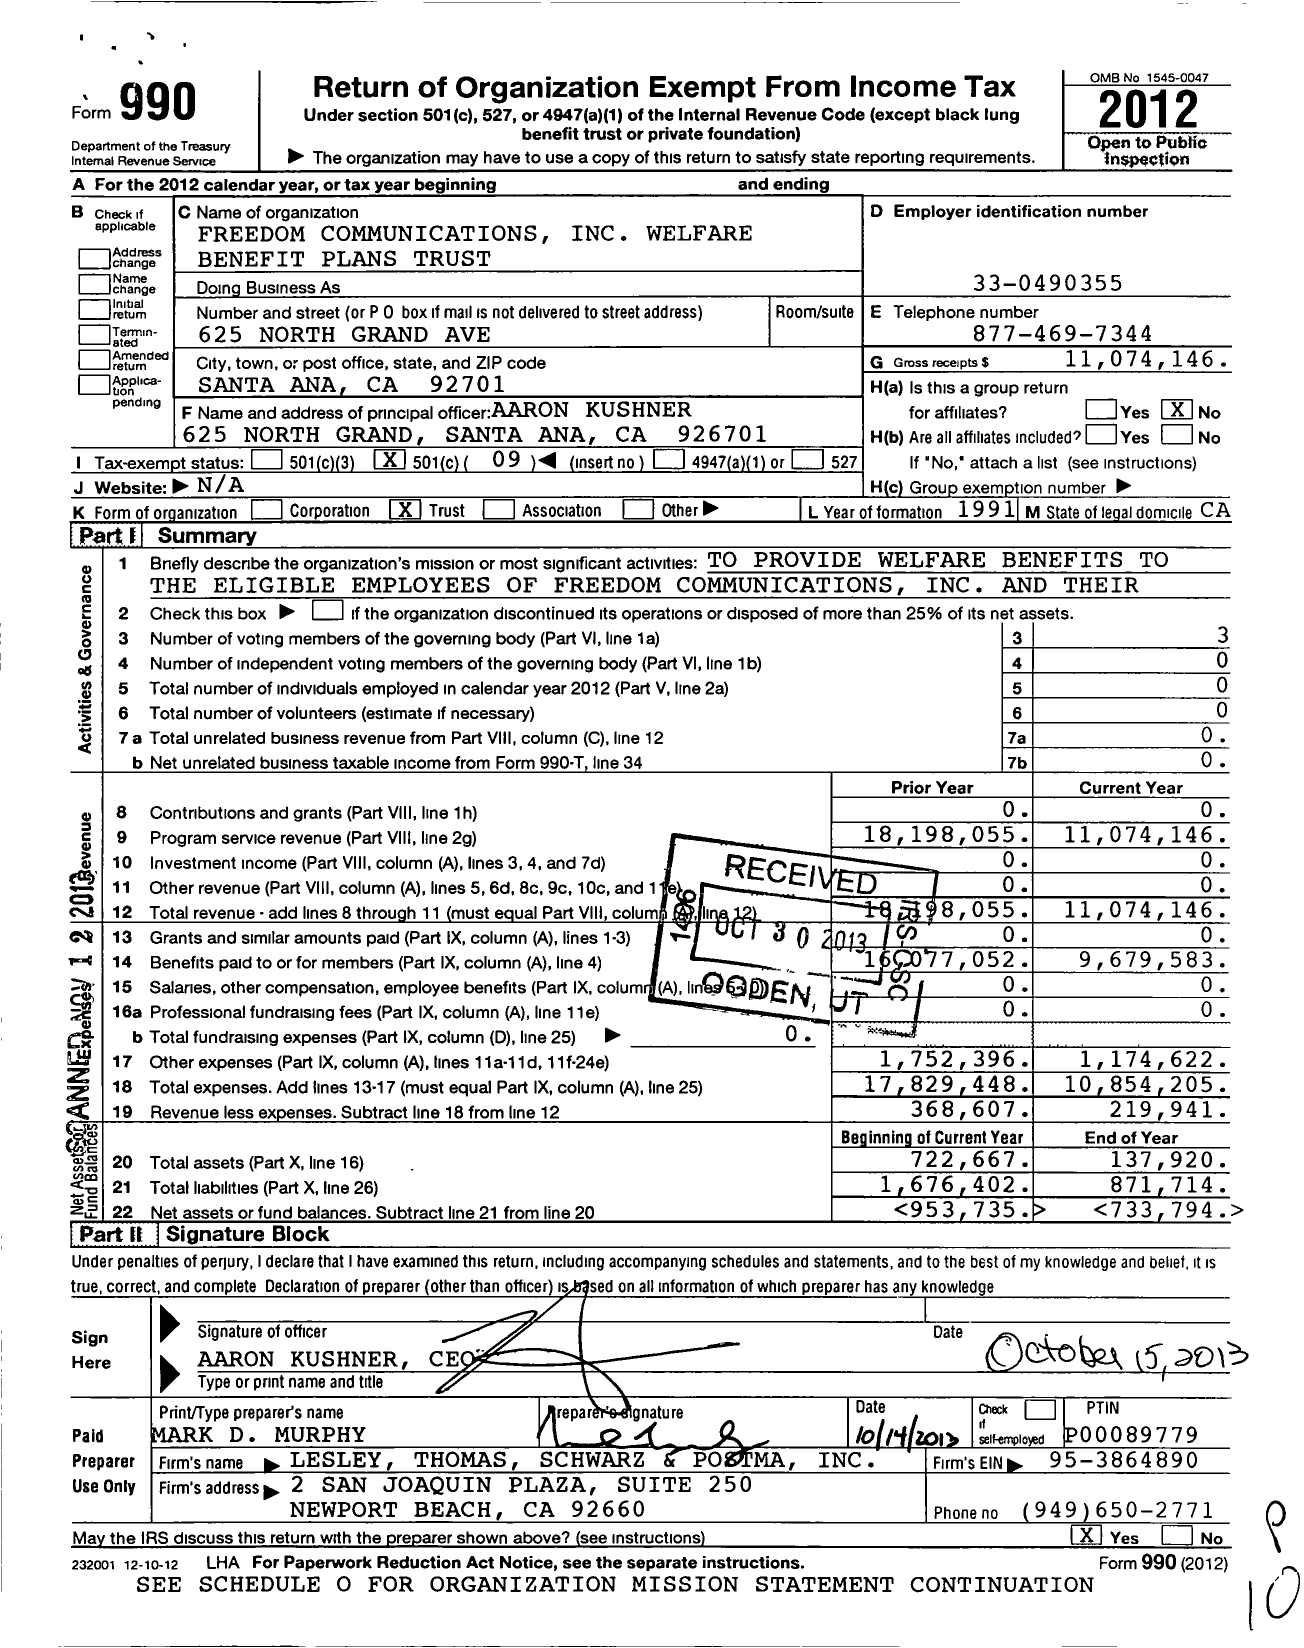 Image of first page of 2012 Form 990O for Freedom Communications Welfare Benefit Plans Trust